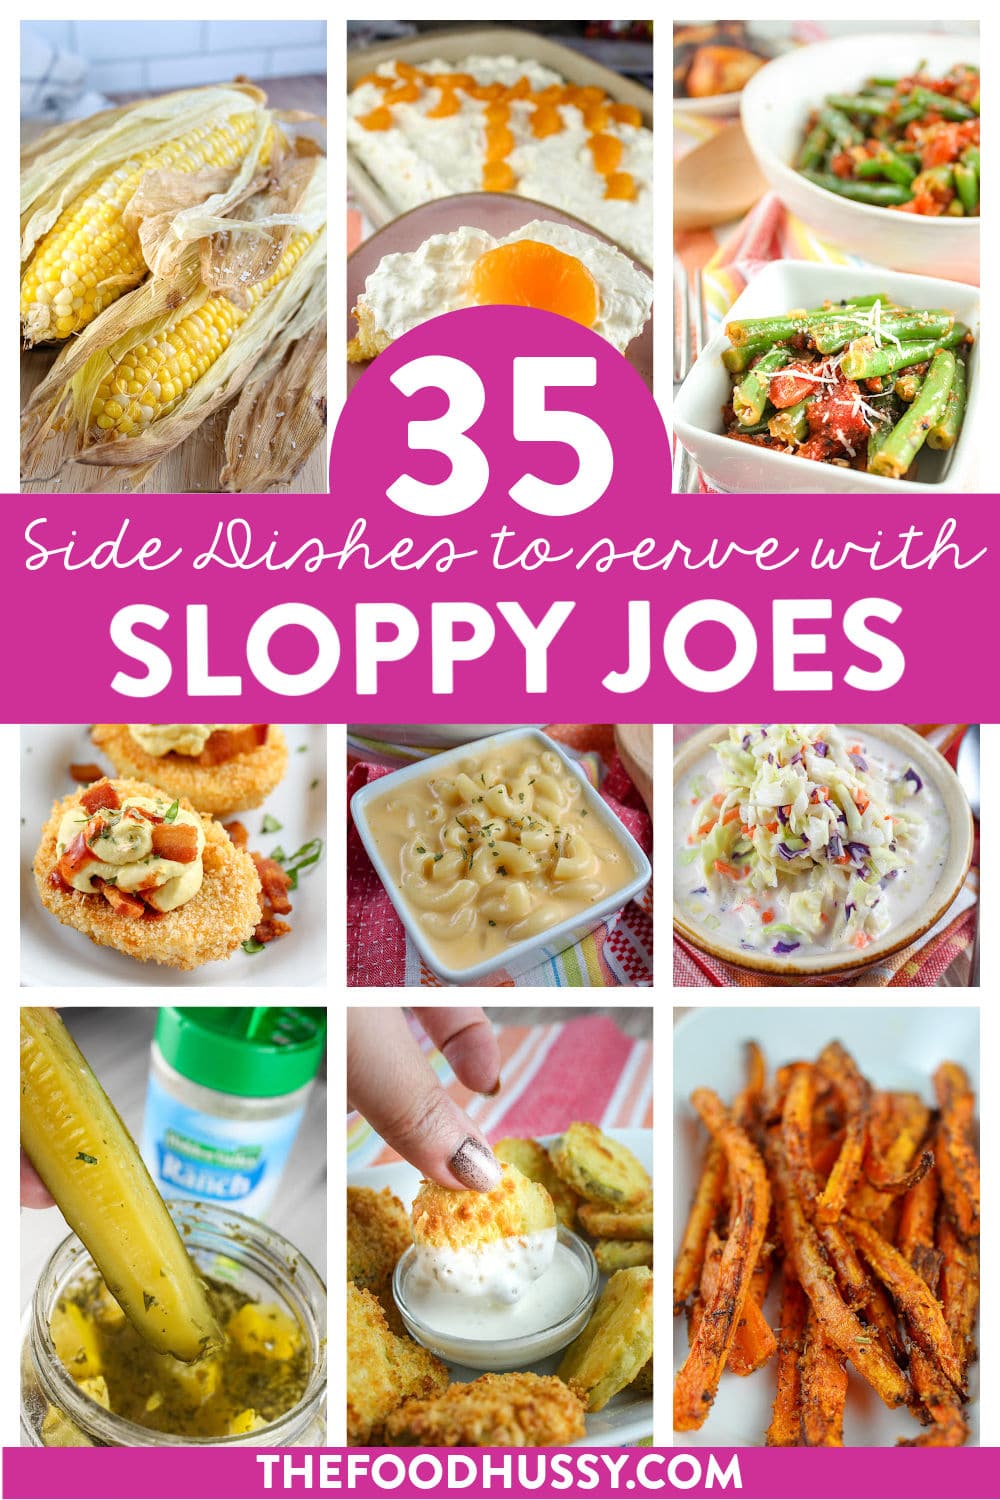 What to serve with Sloppy Joes? Whether you like cole slaw, pasta salad, veggies or french fries - I've got 35 of the best and most delicious Sloppy Joe sides to keep your family smiling and fed! via @foodhussy